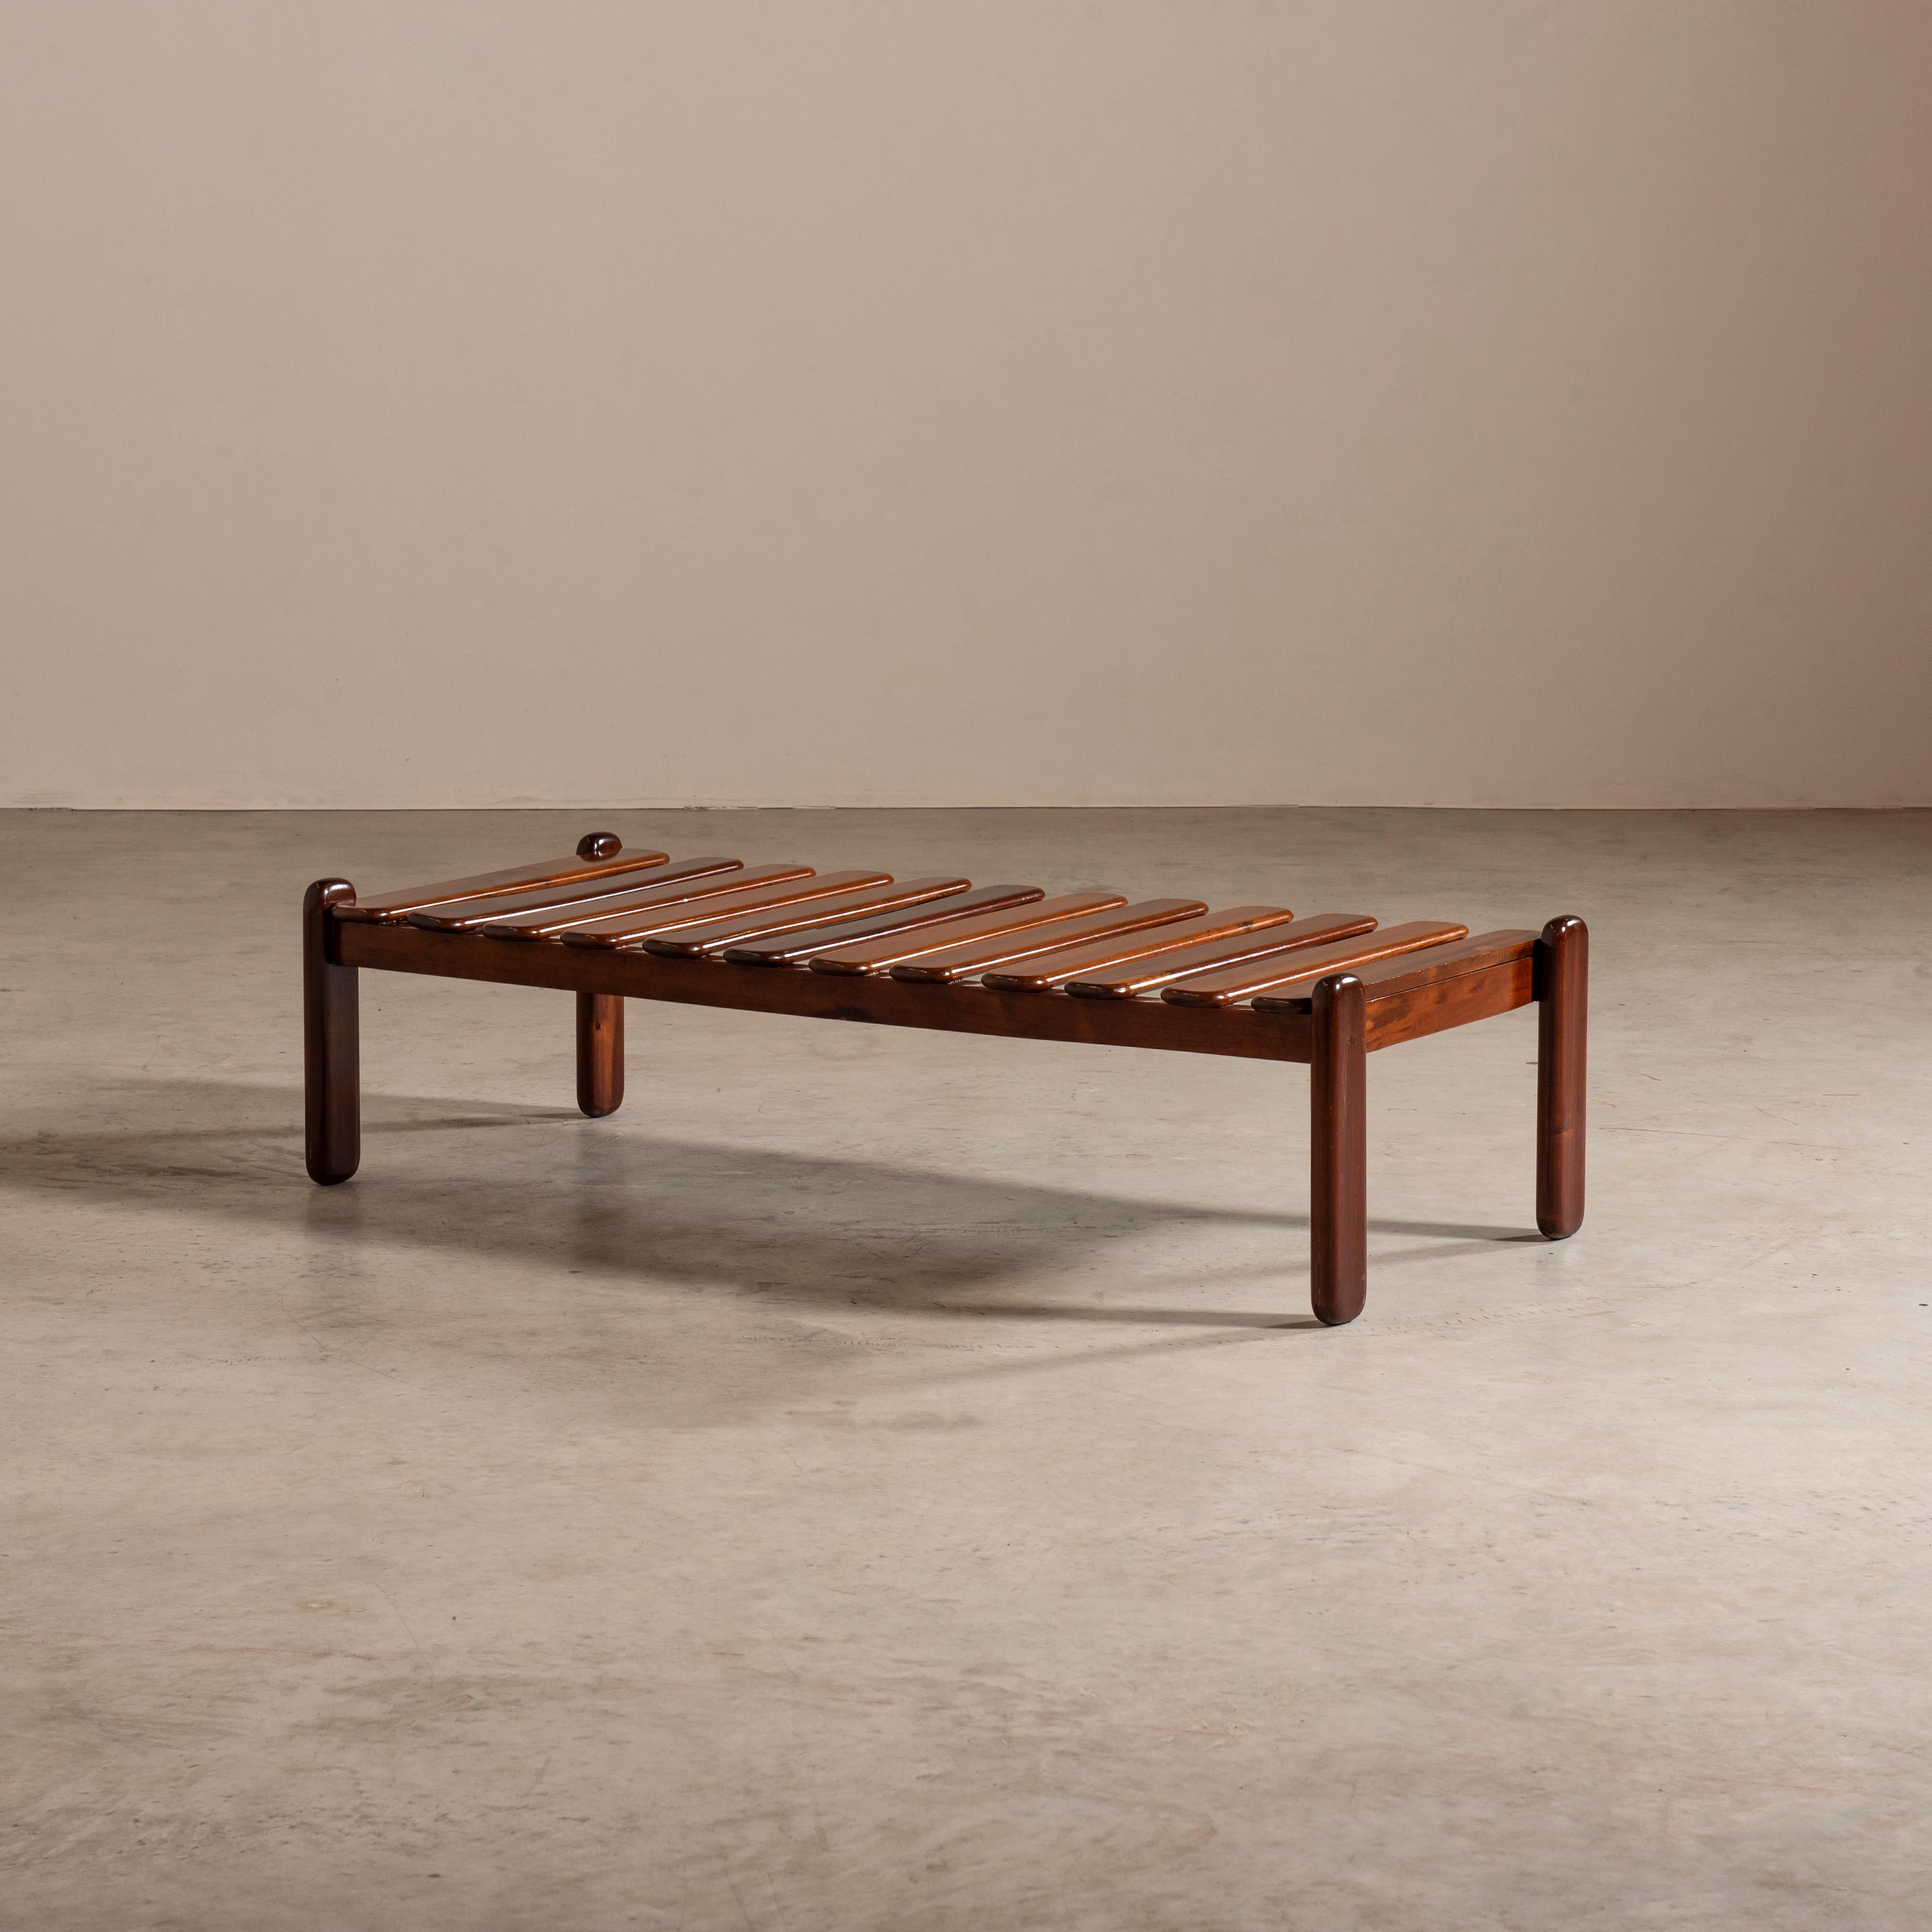 20th Century Small Slat Bench in Solid Brazilian Hardwood, Mid-Century Modern For Sale